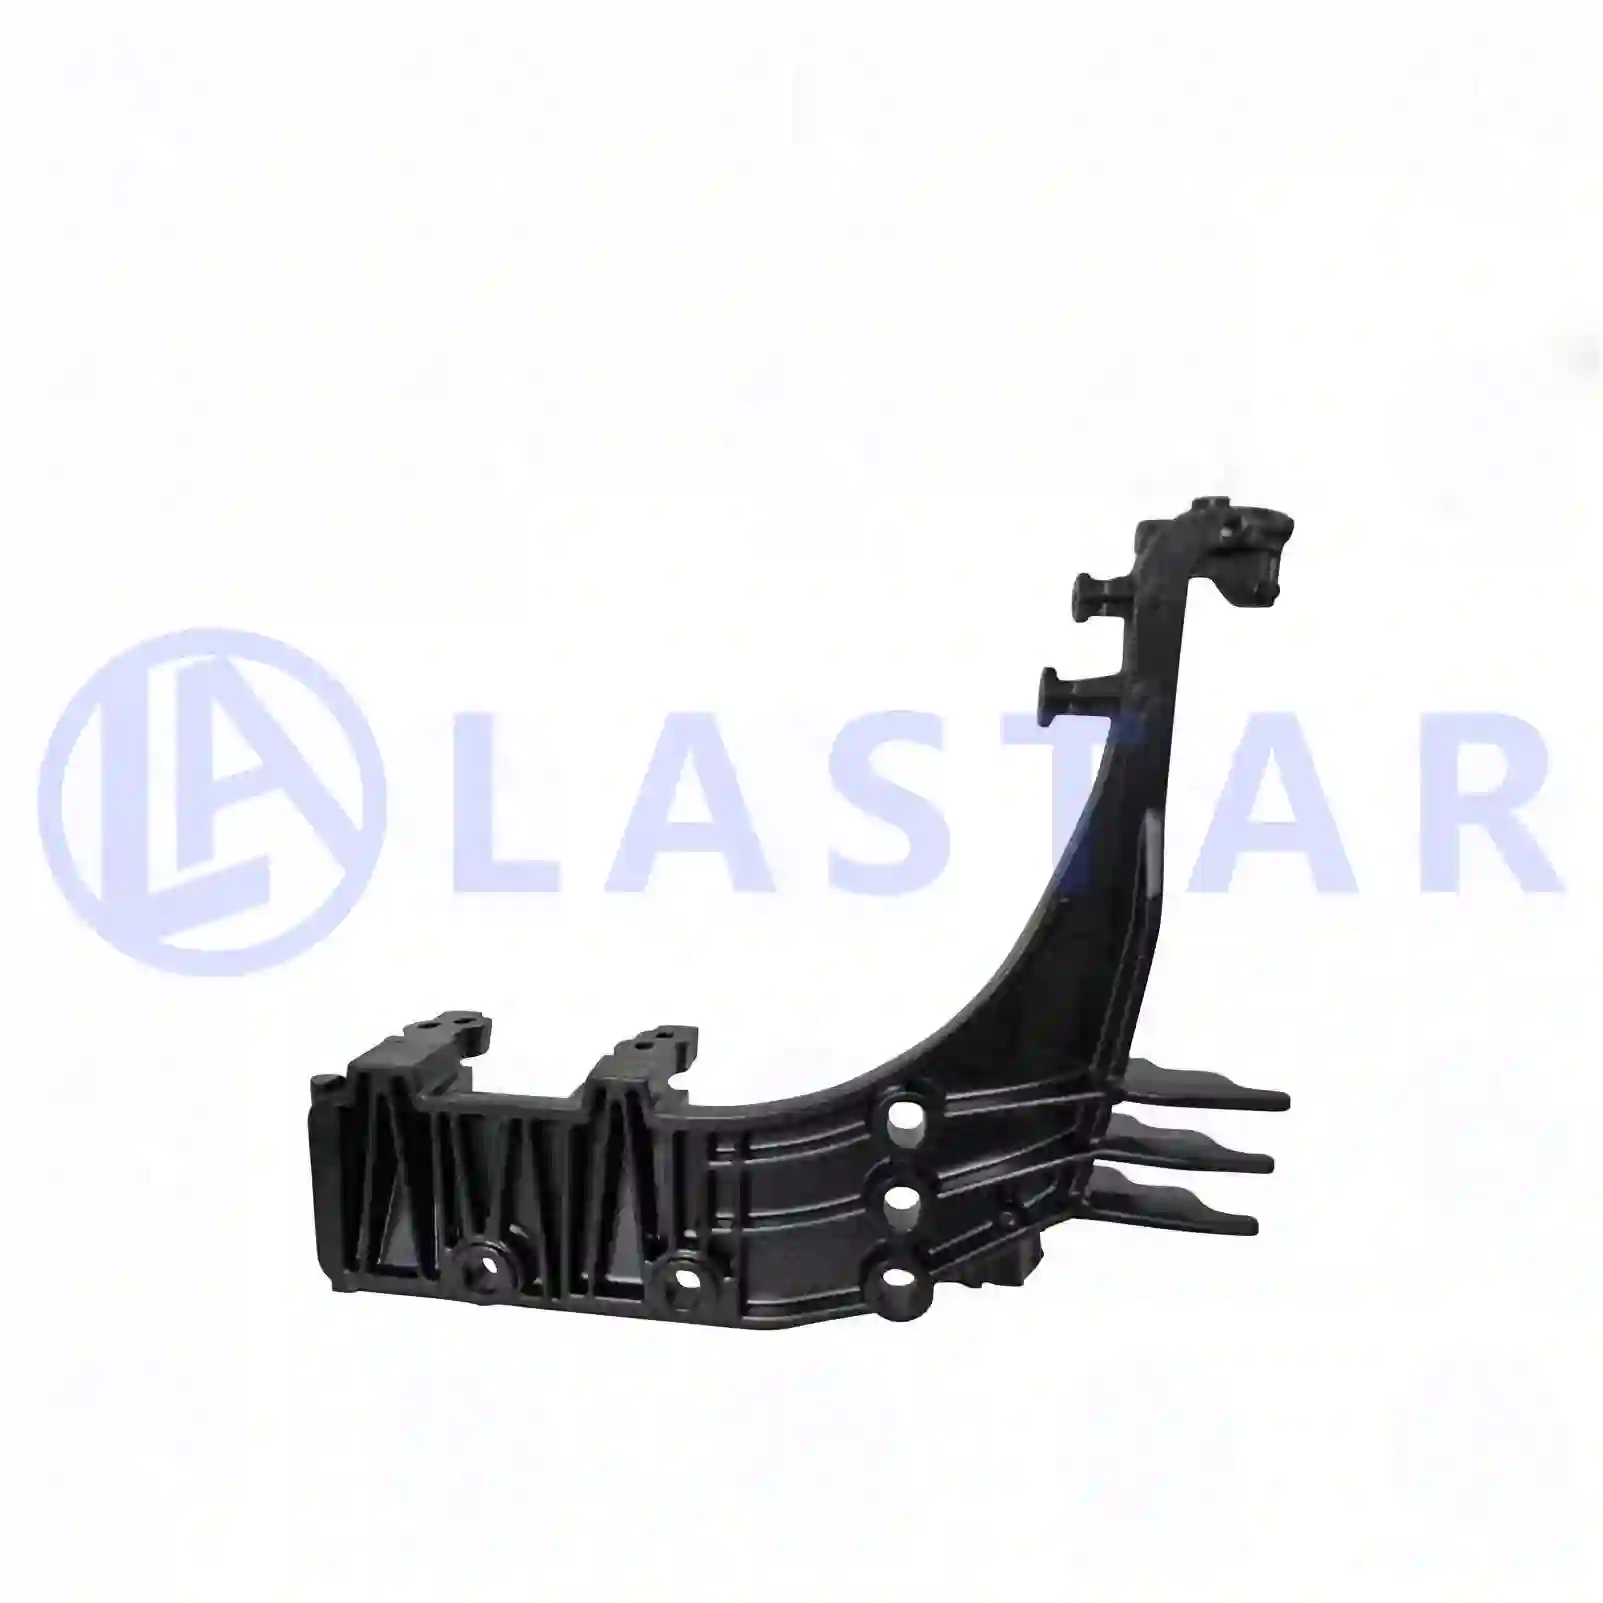 Support, boarding step, left, 77719791, 1798459, 1948151 ||  77719791 Lastar Spare Part | Truck Spare Parts, Auotomotive Spare Parts Support, boarding step, left, 77719791, 1798459, 1948151 ||  77719791 Lastar Spare Part | Truck Spare Parts, Auotomotive Spare Parts